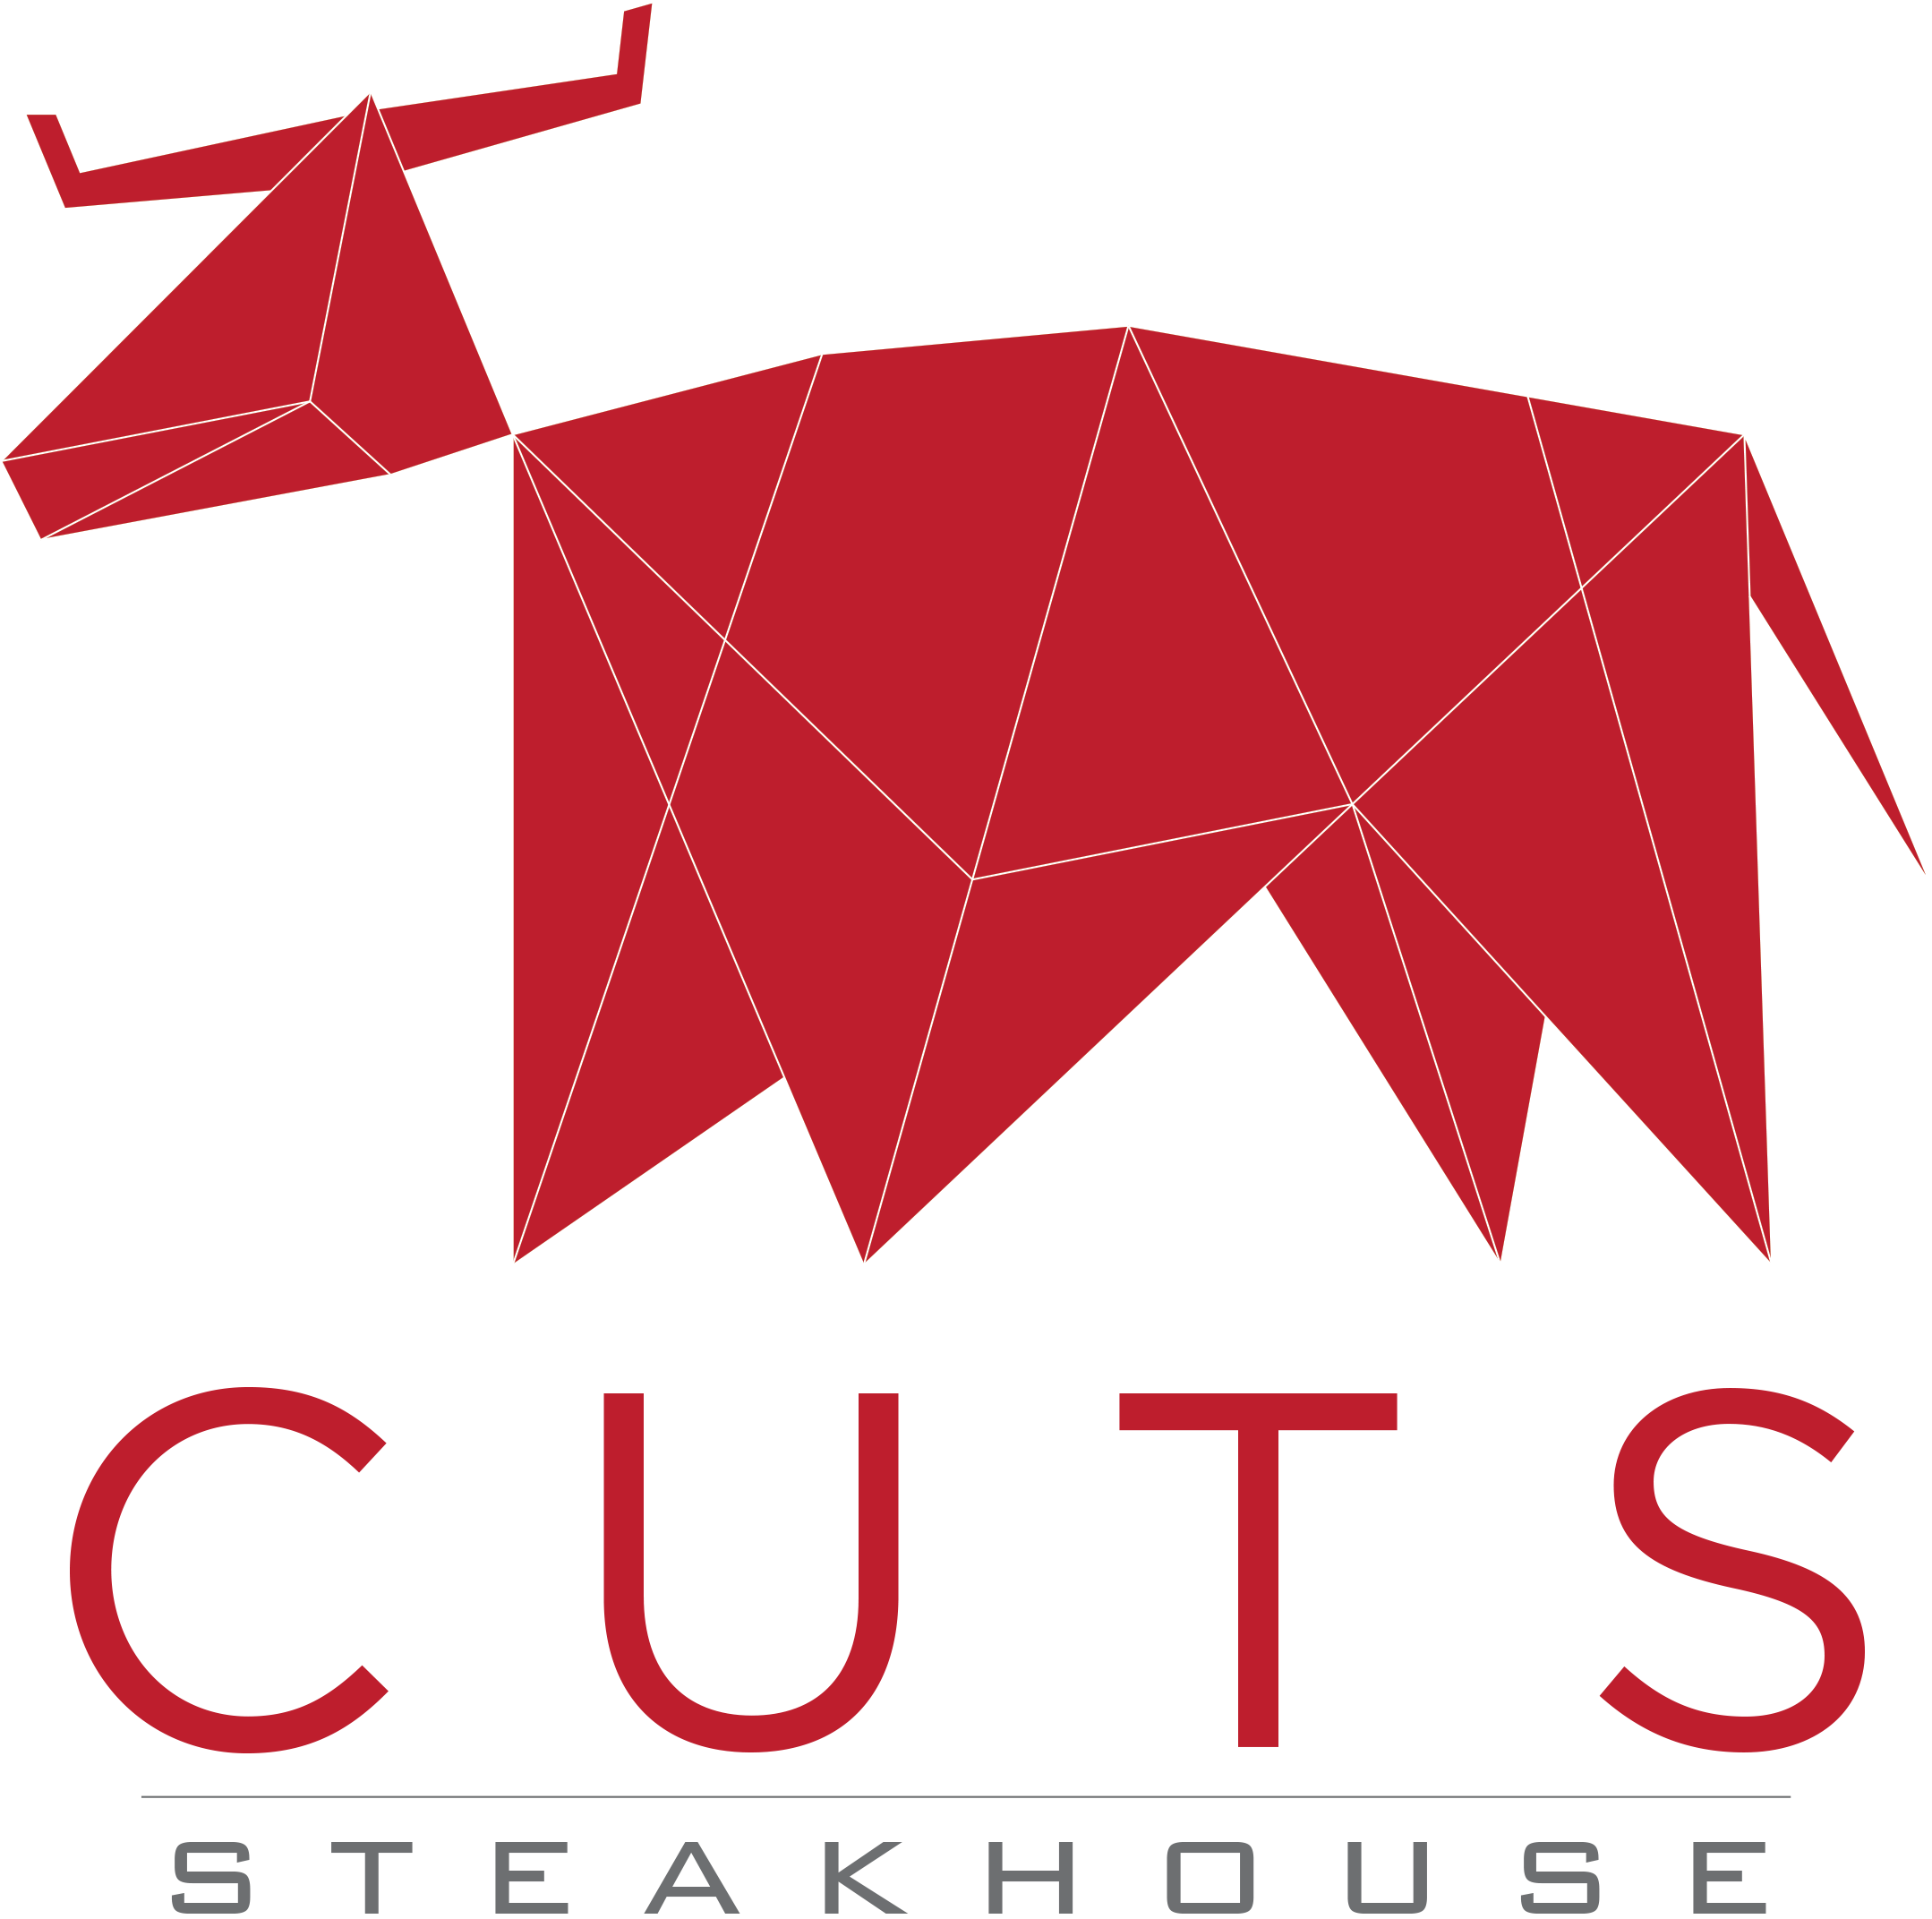 Cut - Products, Competitors, Financials, Employees, Headquarters Locations